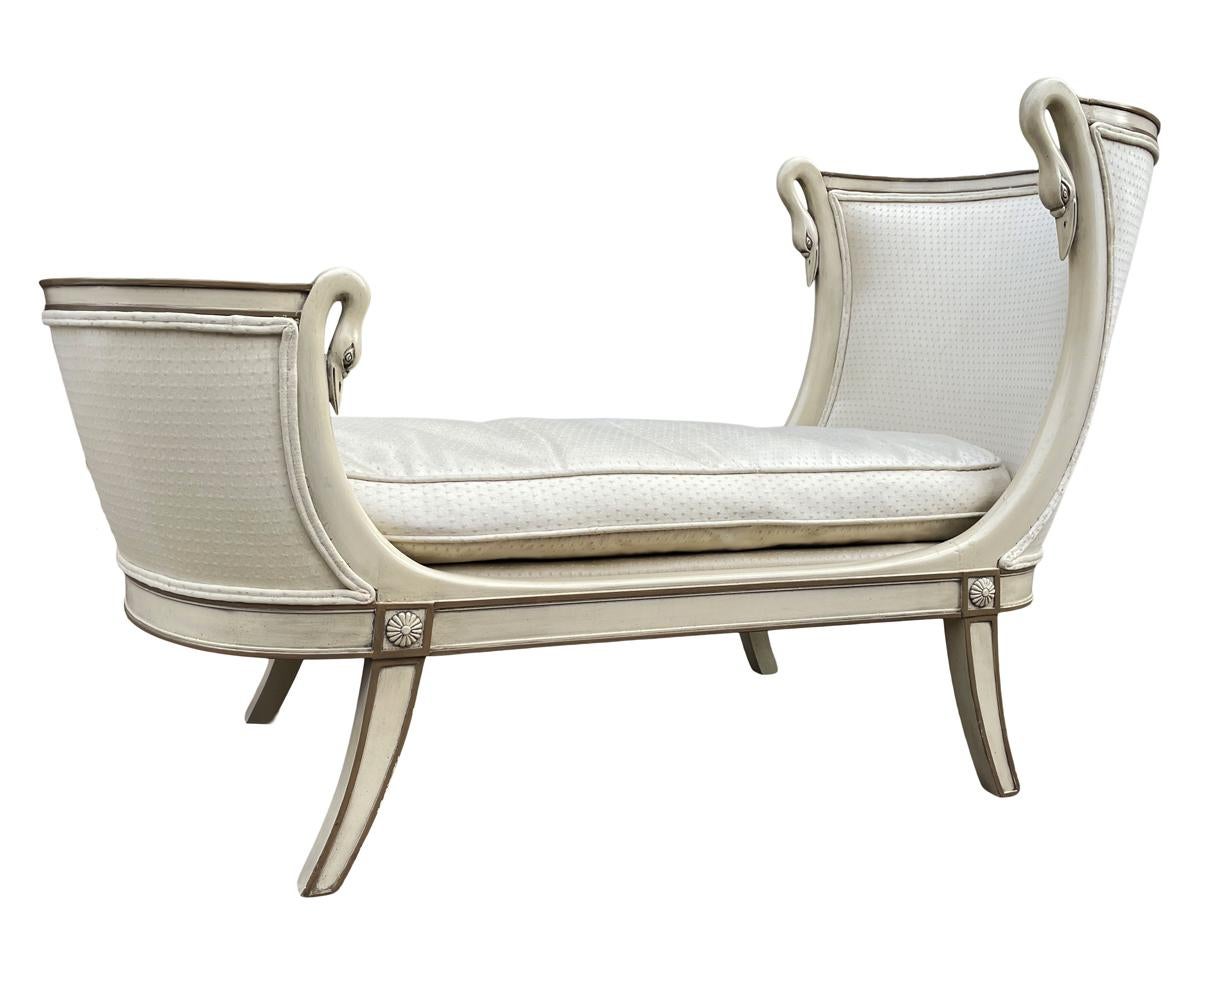 A vintage glam chaise lounge from Italy circa 1960's. It features cream and dark gold solid wood framing with the original upholstery. Very good original condition and ready to use. 